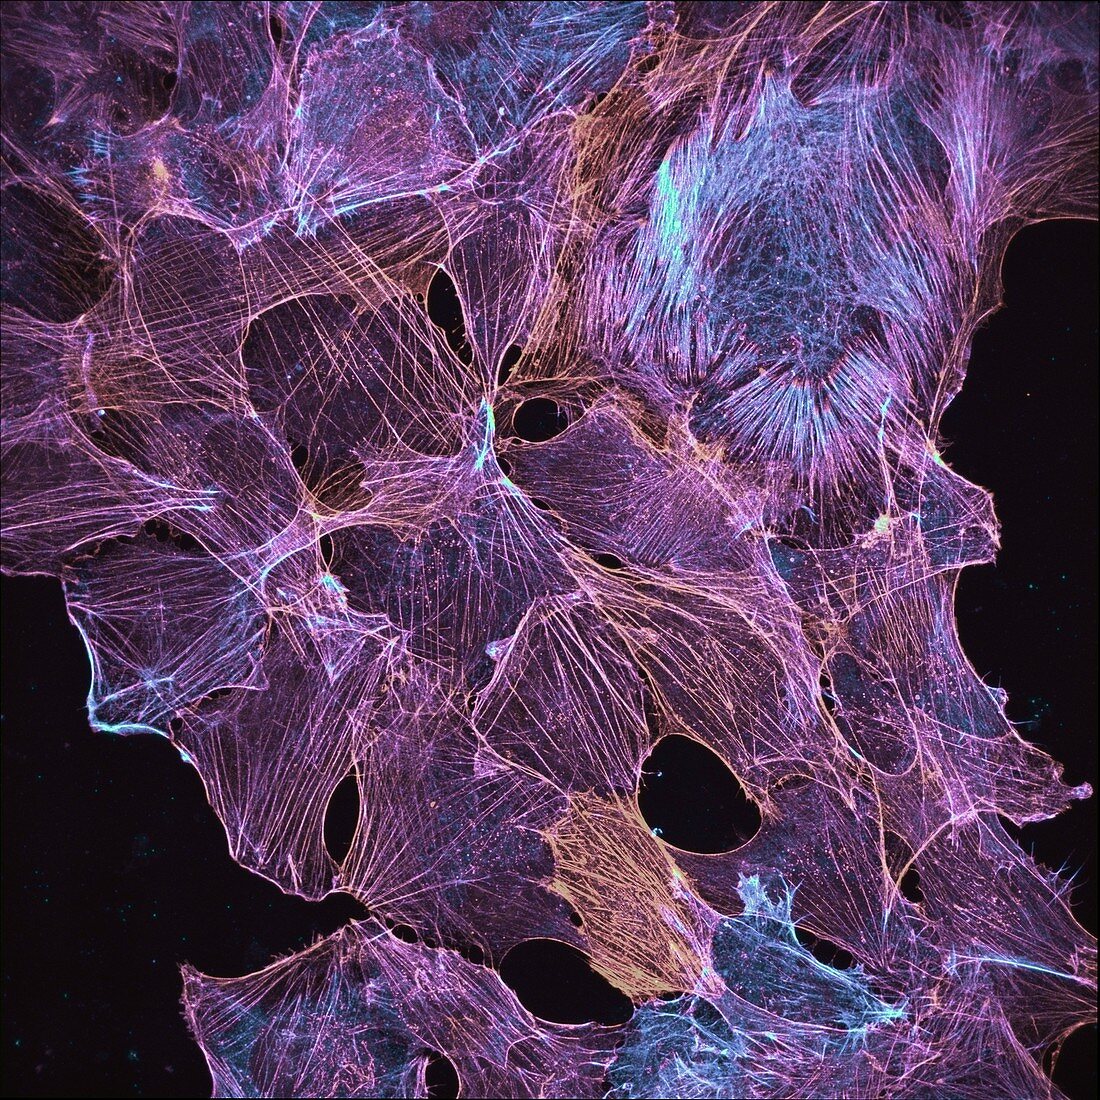 Cultured cancer cells cytoskeleton, light micrograph